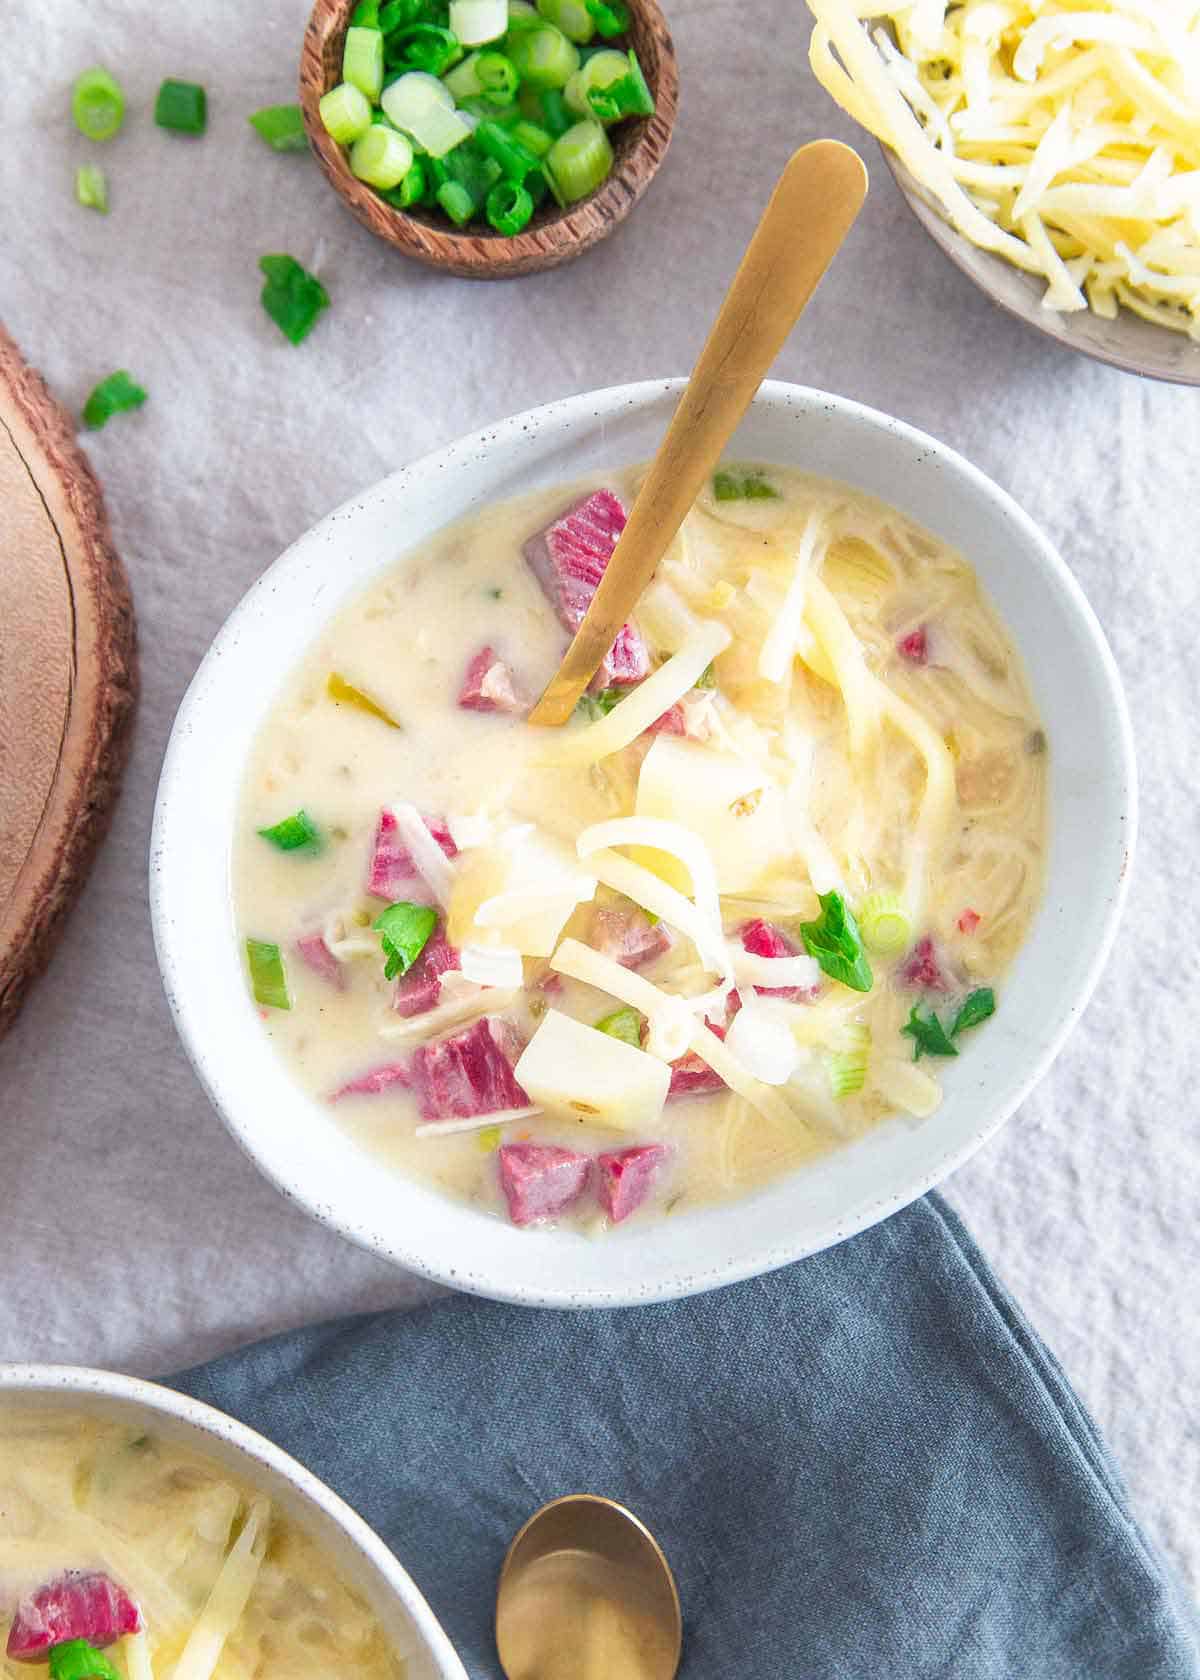 Give this creamy, hearty Reuben soup recipe a try this St. Patrick's Day, it's the perfect way to enjoy corned beef this holiday.